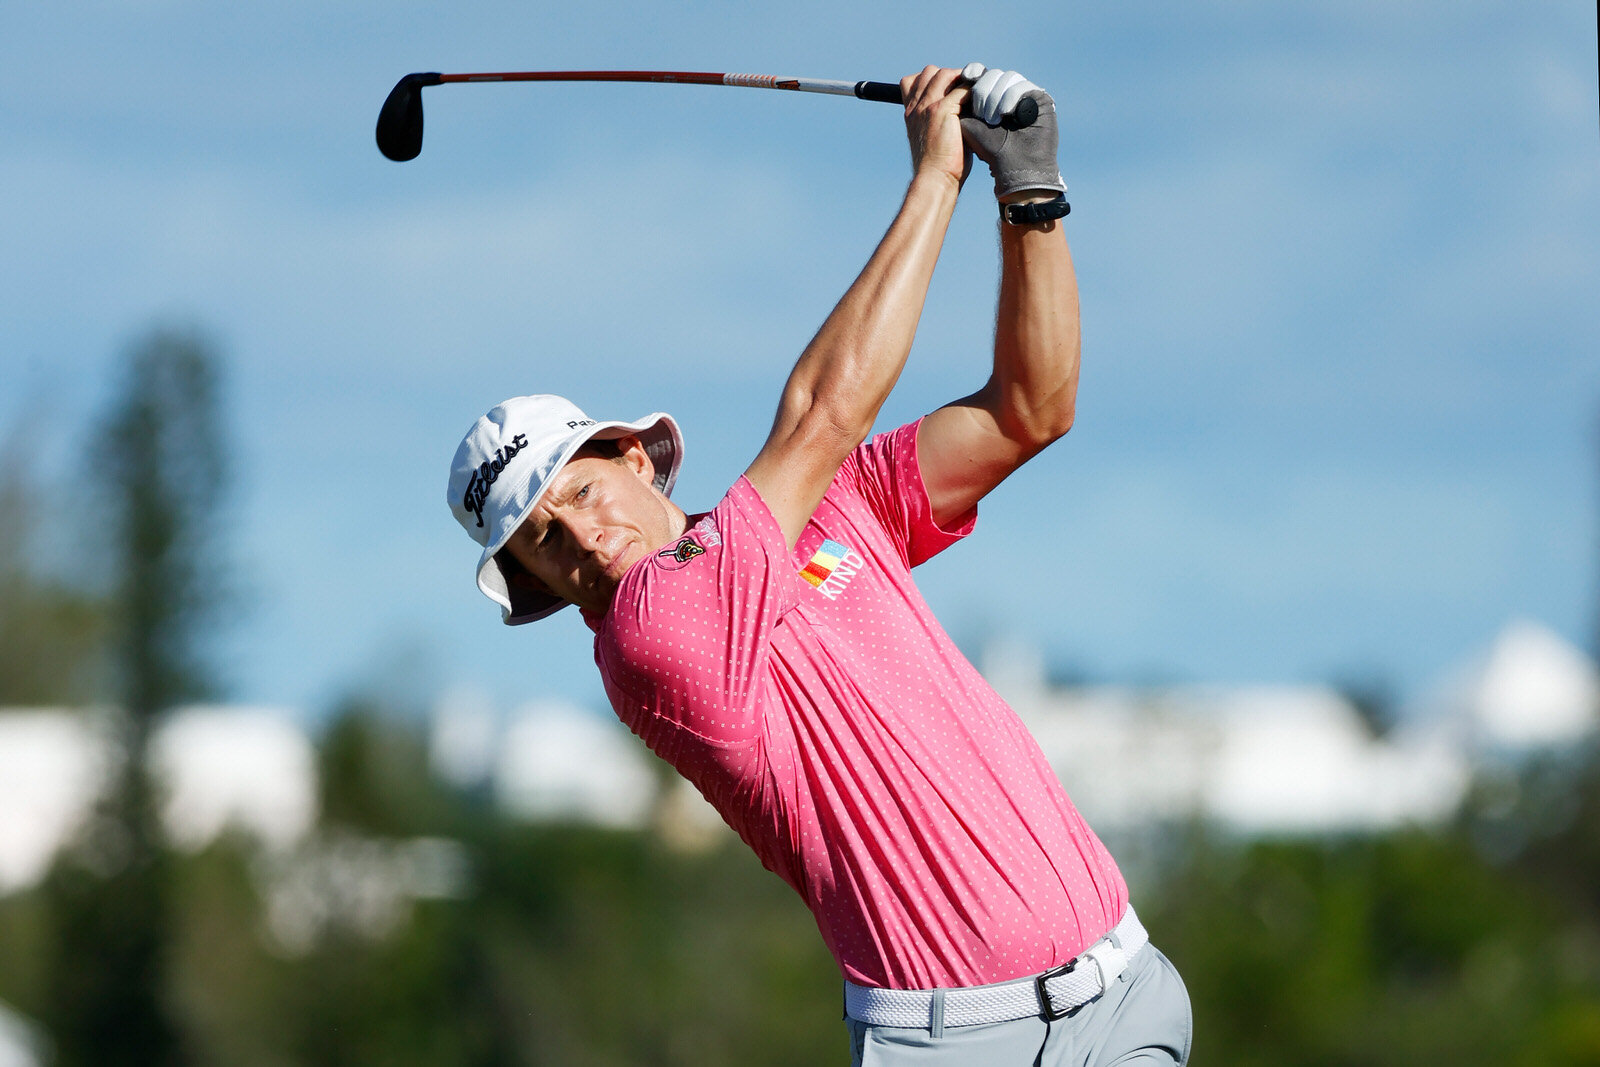  SOUTHAMPTON, BERMUDA - OCTOBER 29: Peter Malnati of the United States plays his shot from the tenth tee during the first round of the Bermuda Championship at Port Royal Golf Course on October 29, 2020 in Southampton, Bermuda. (Photo by Gregory Shamu